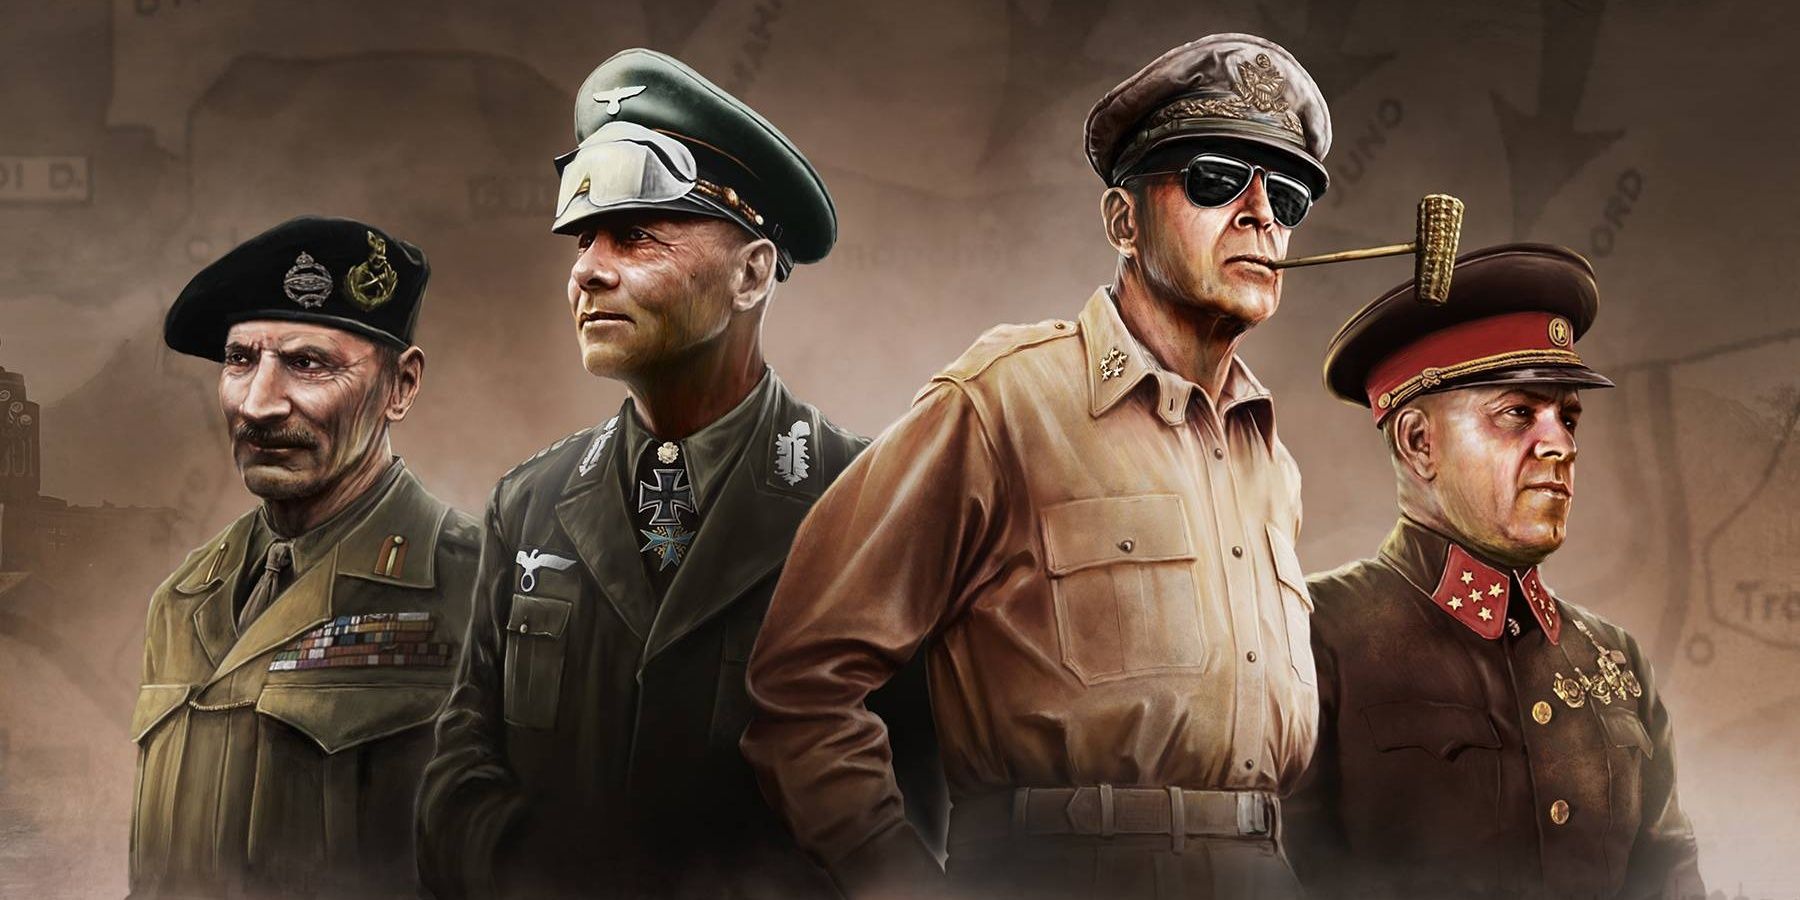 hearts of iron 4 steam workshop not working